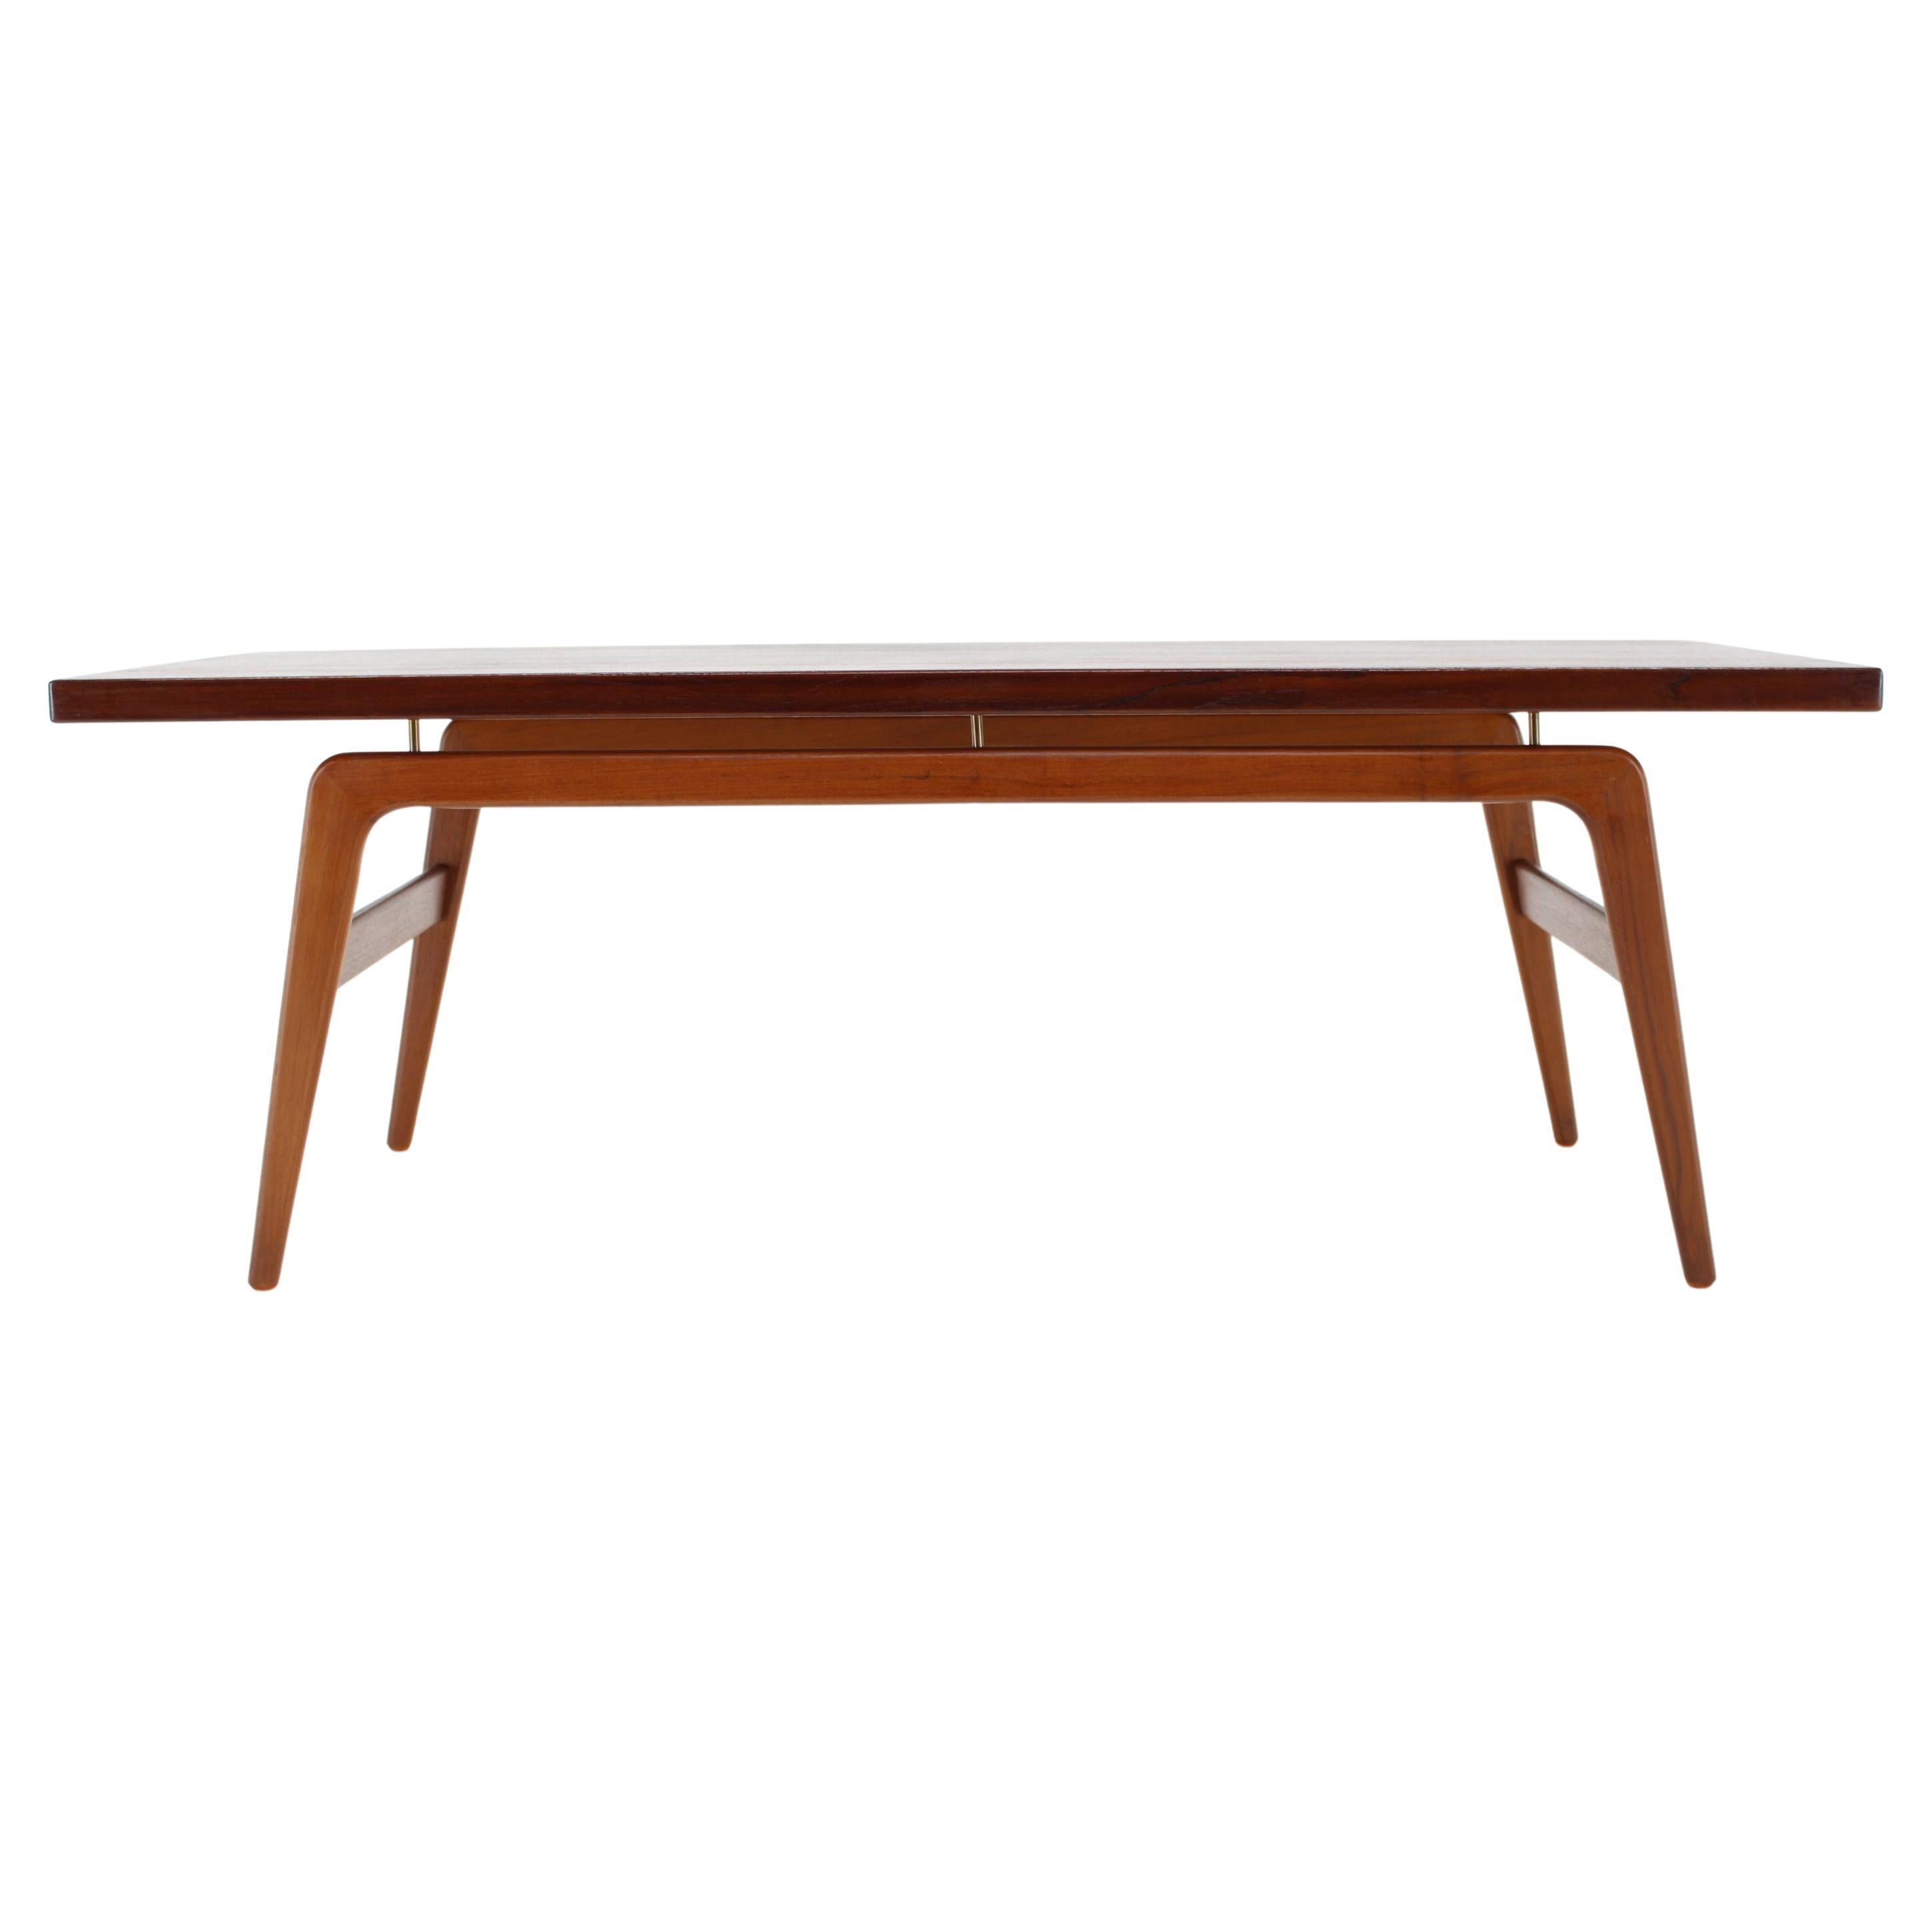 1960s Teak Coffee Table by Clausen and Son for Silkeborg, Denmark  For Sale